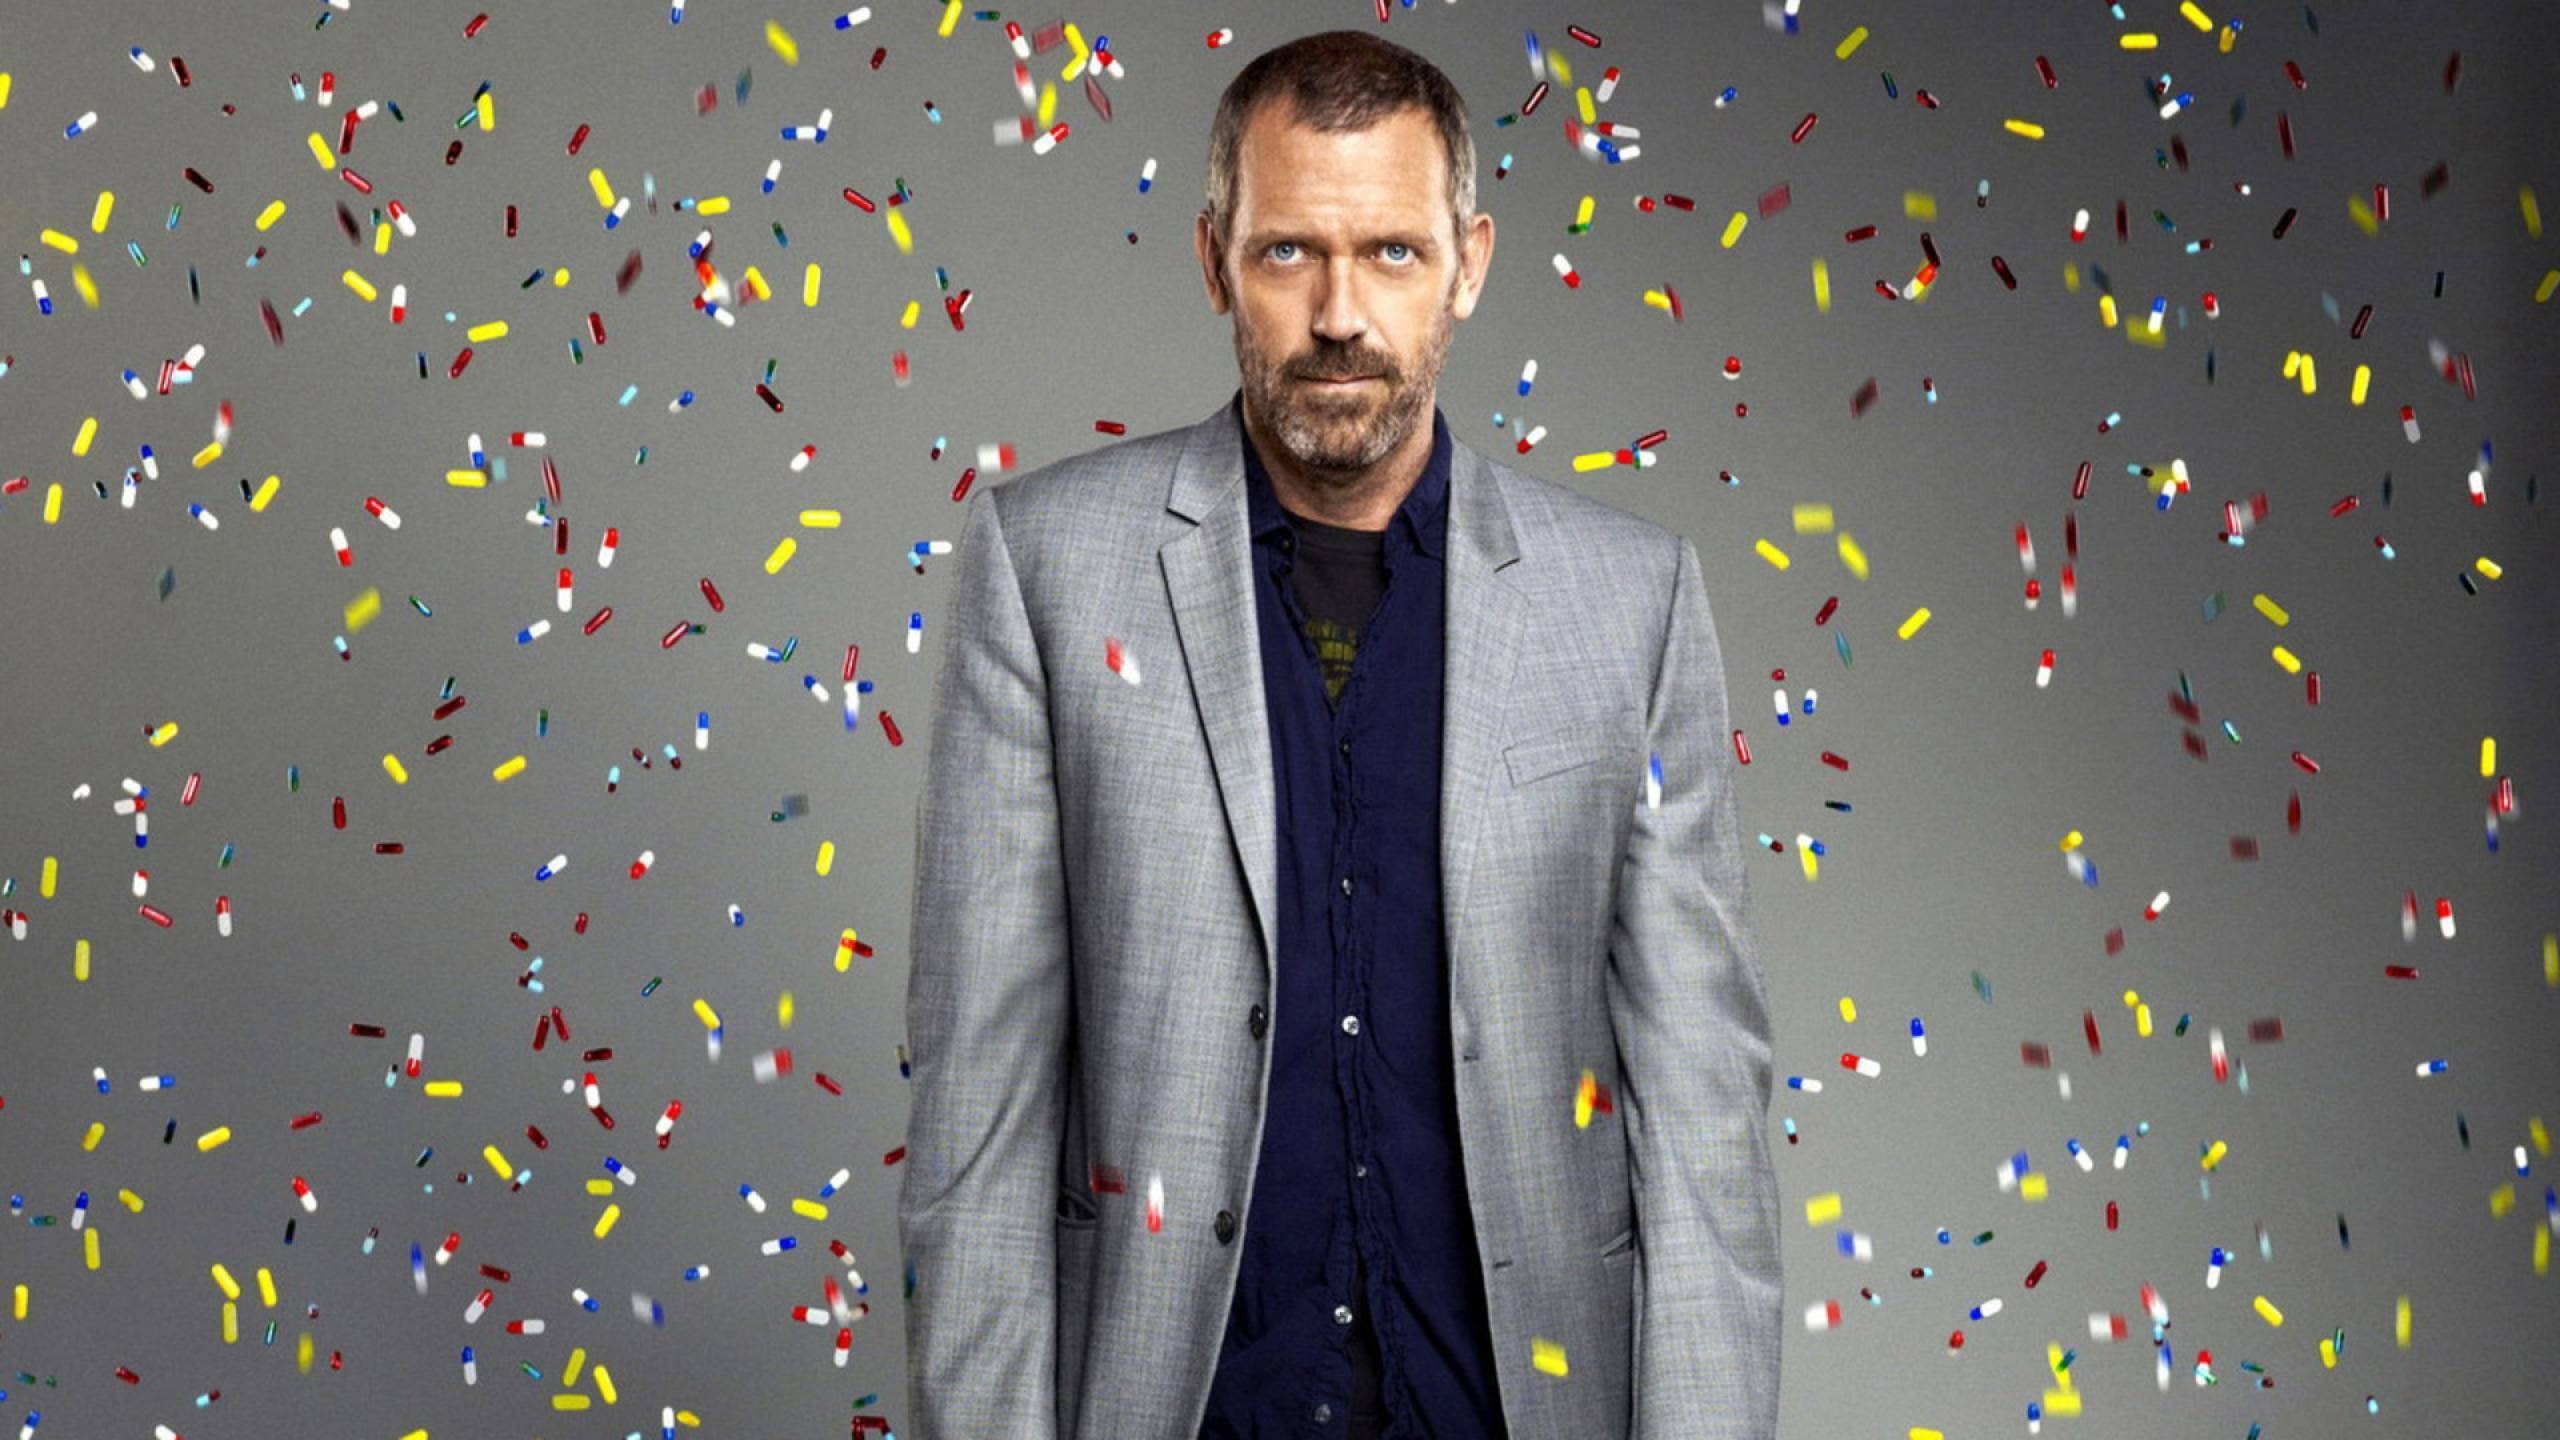 Hugh Laurie Pills, dr house, house md, actor, celeb